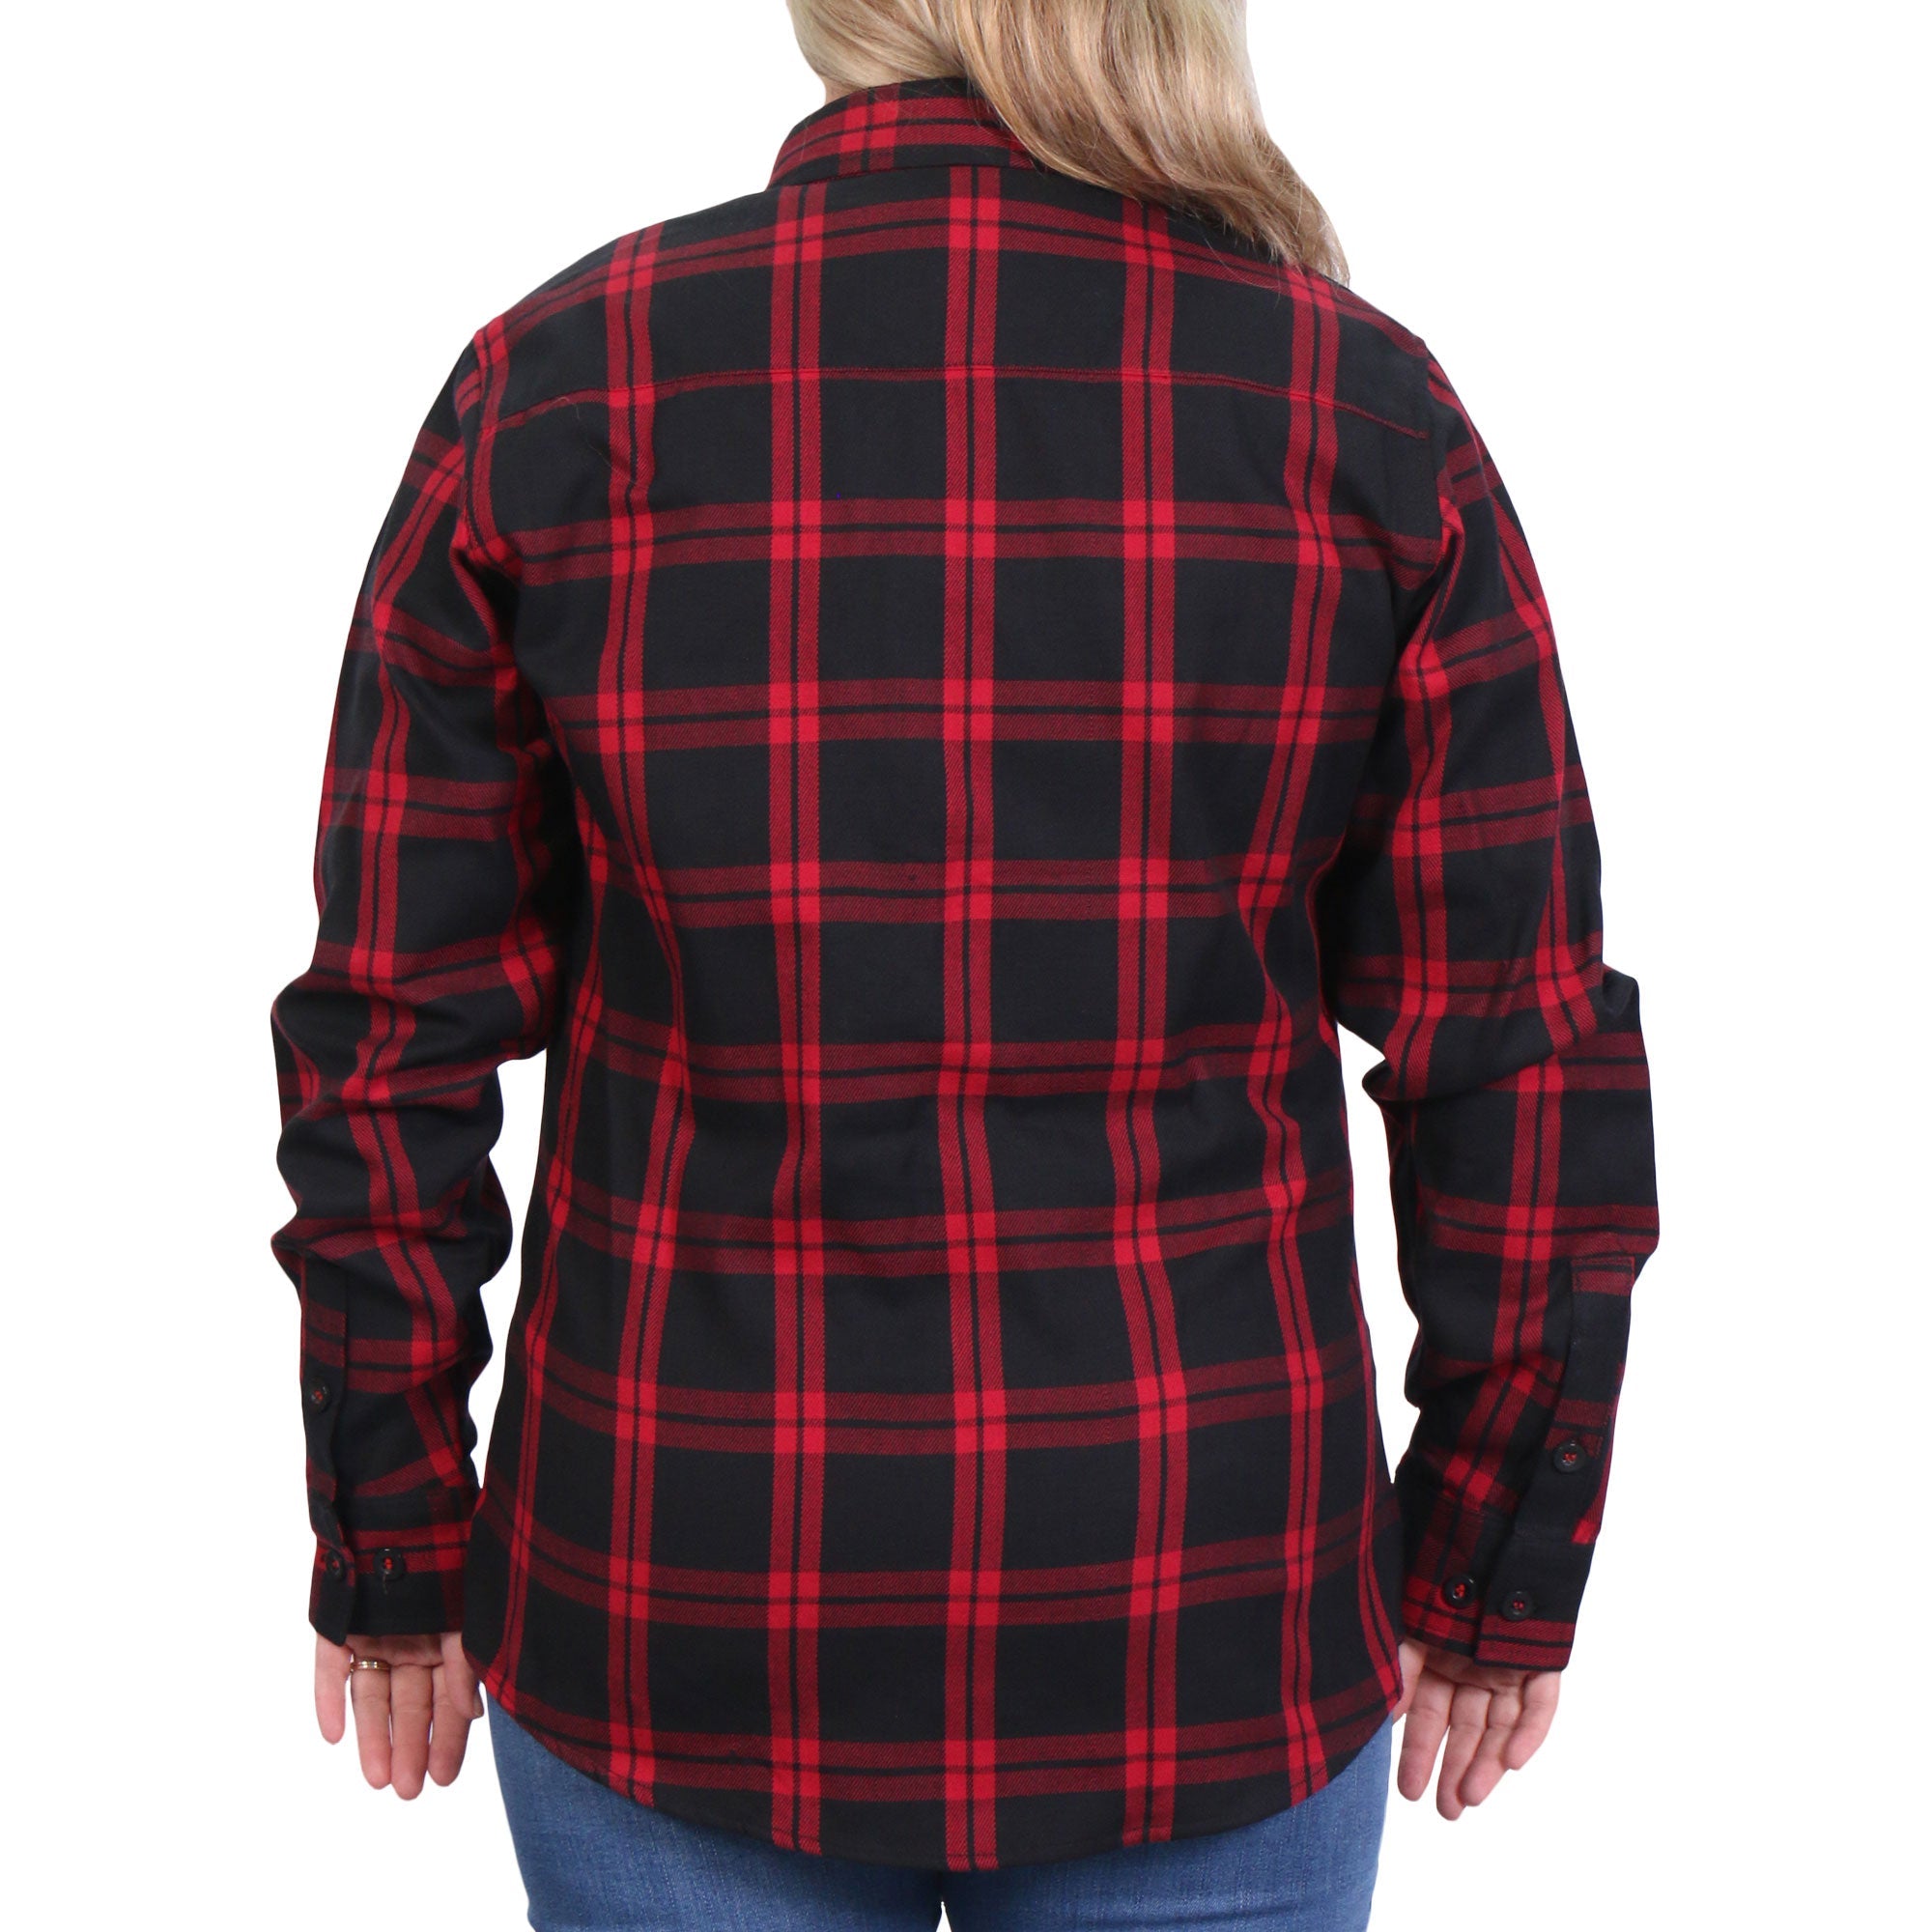 Hot Leathers FLL3009 Ladies 'Black and Red' Flannel Long Sleeve Shirt